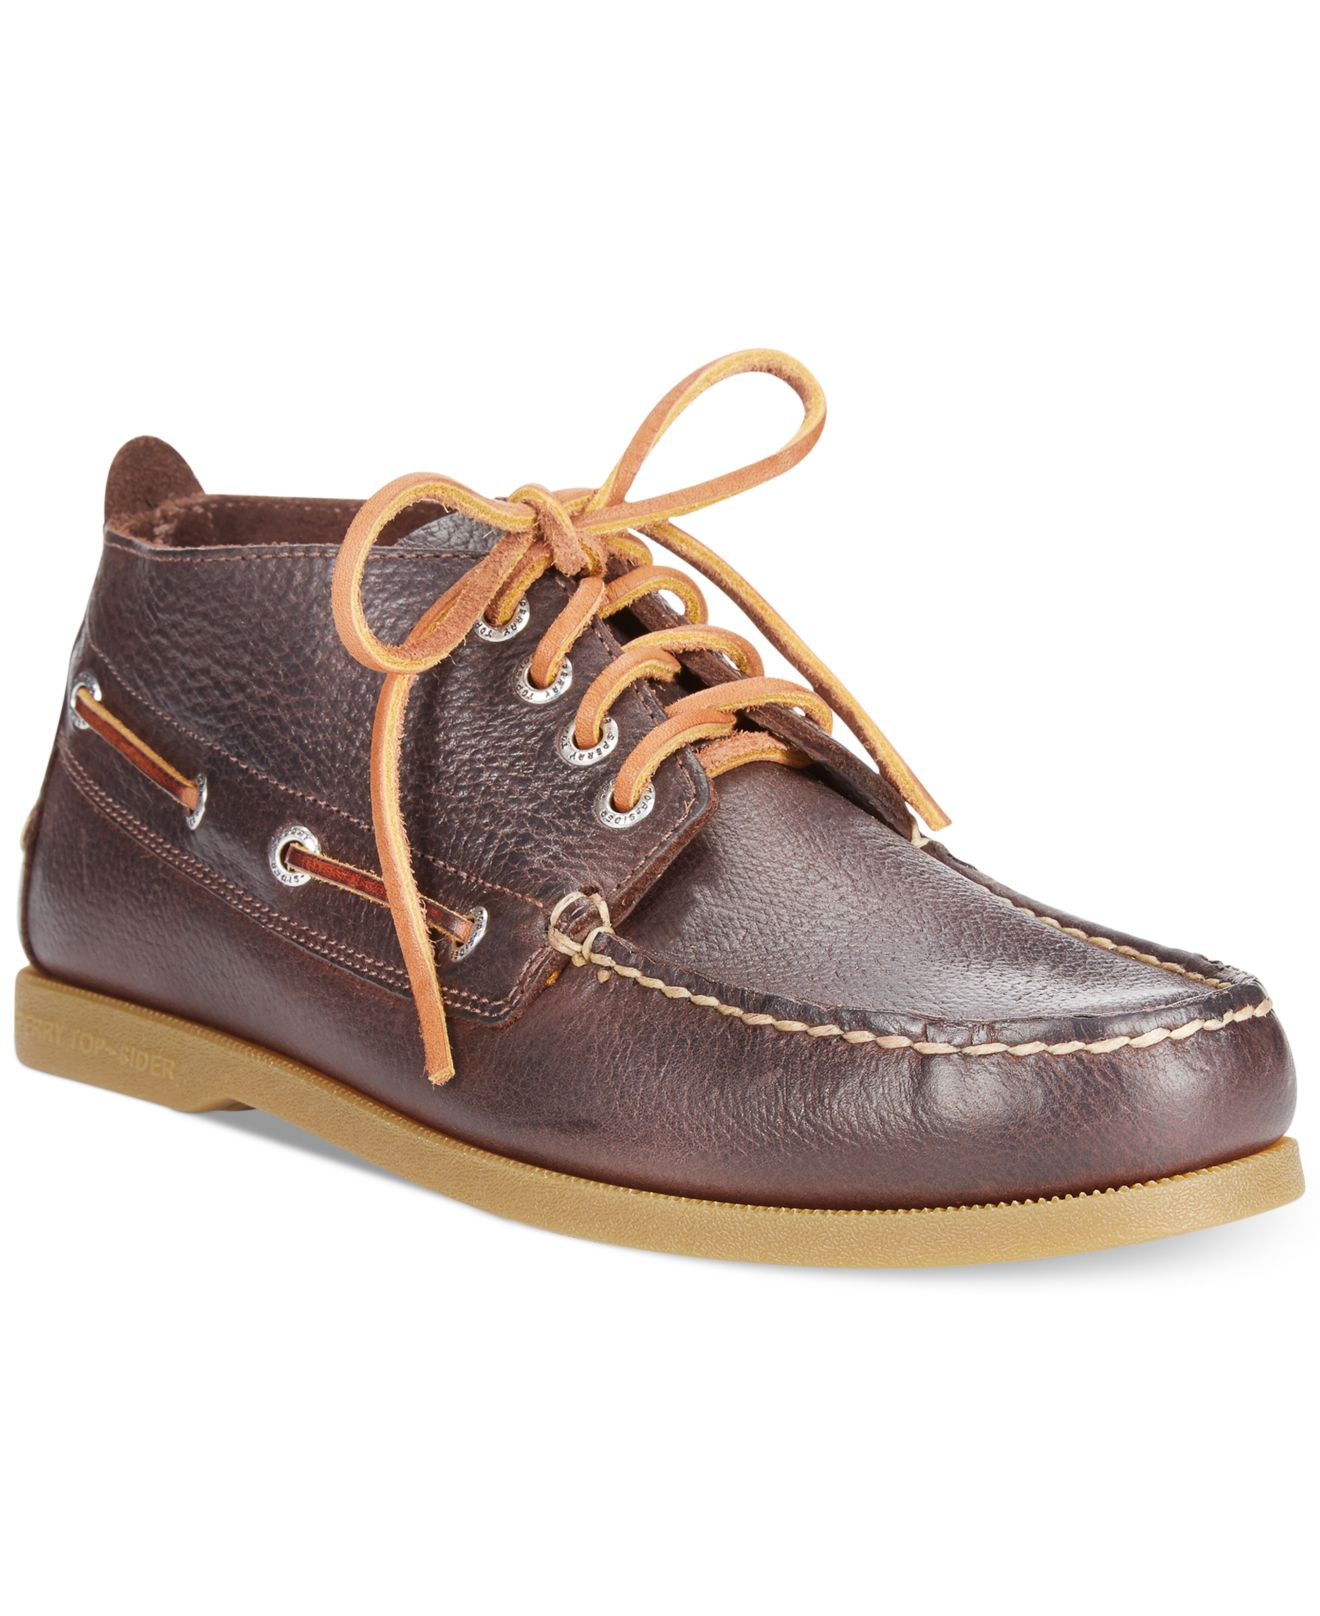 Sperry Top-Sider A/O Boardwalk Chukka Boots in Brown for Men - Lyst